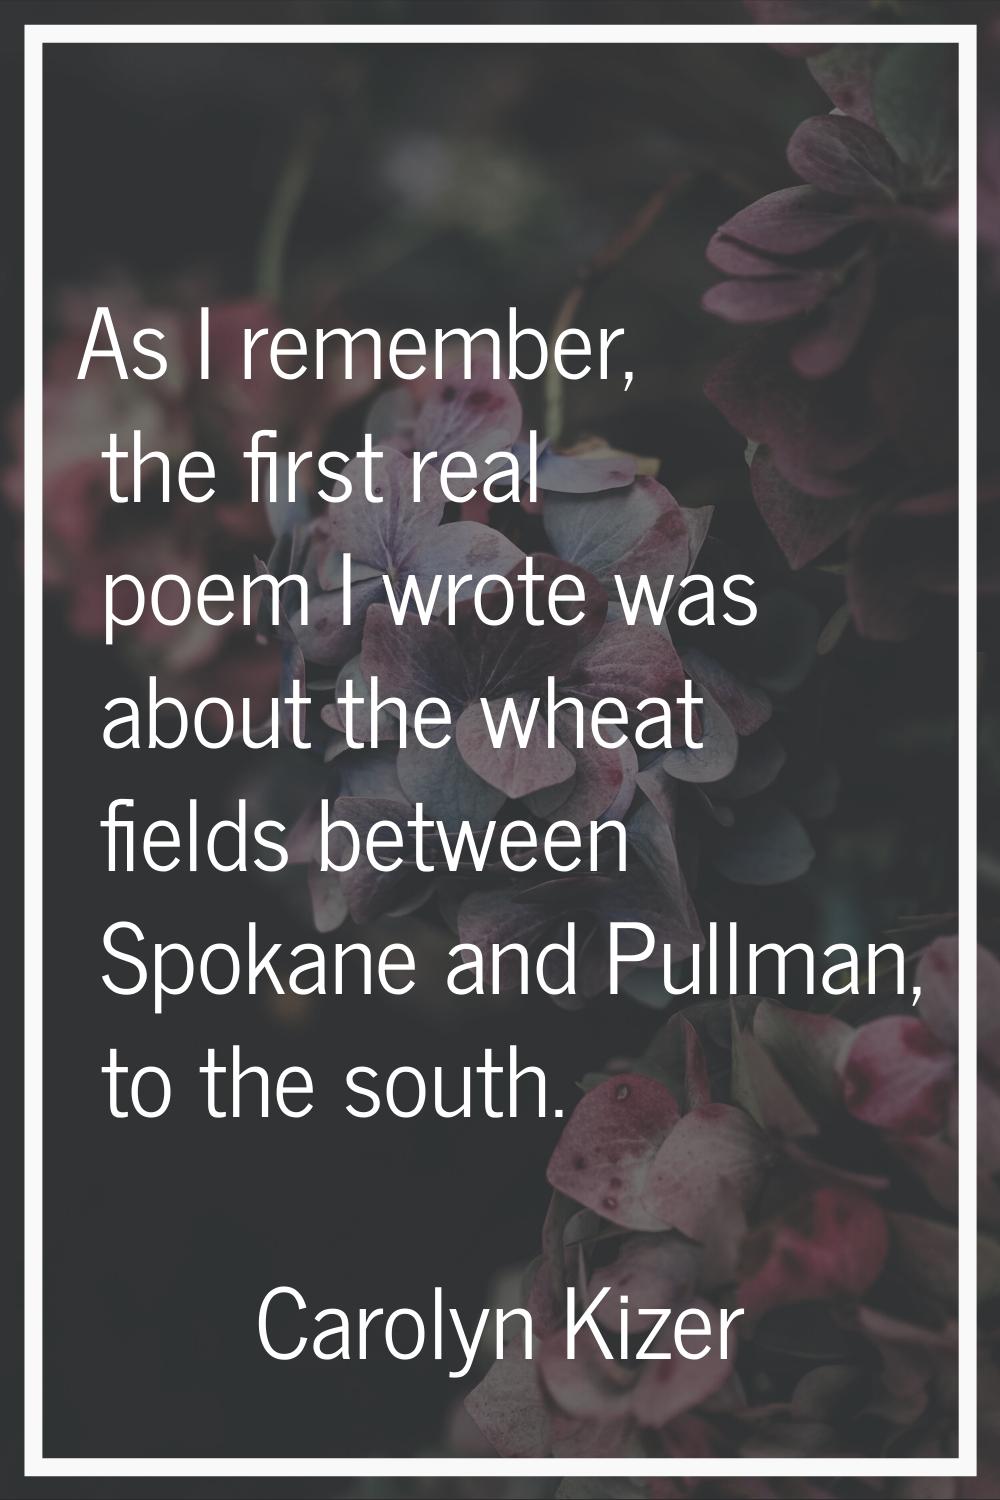 As I remember, the first real poem I wrote was about the wheat fields between Spokane and Pullman, 